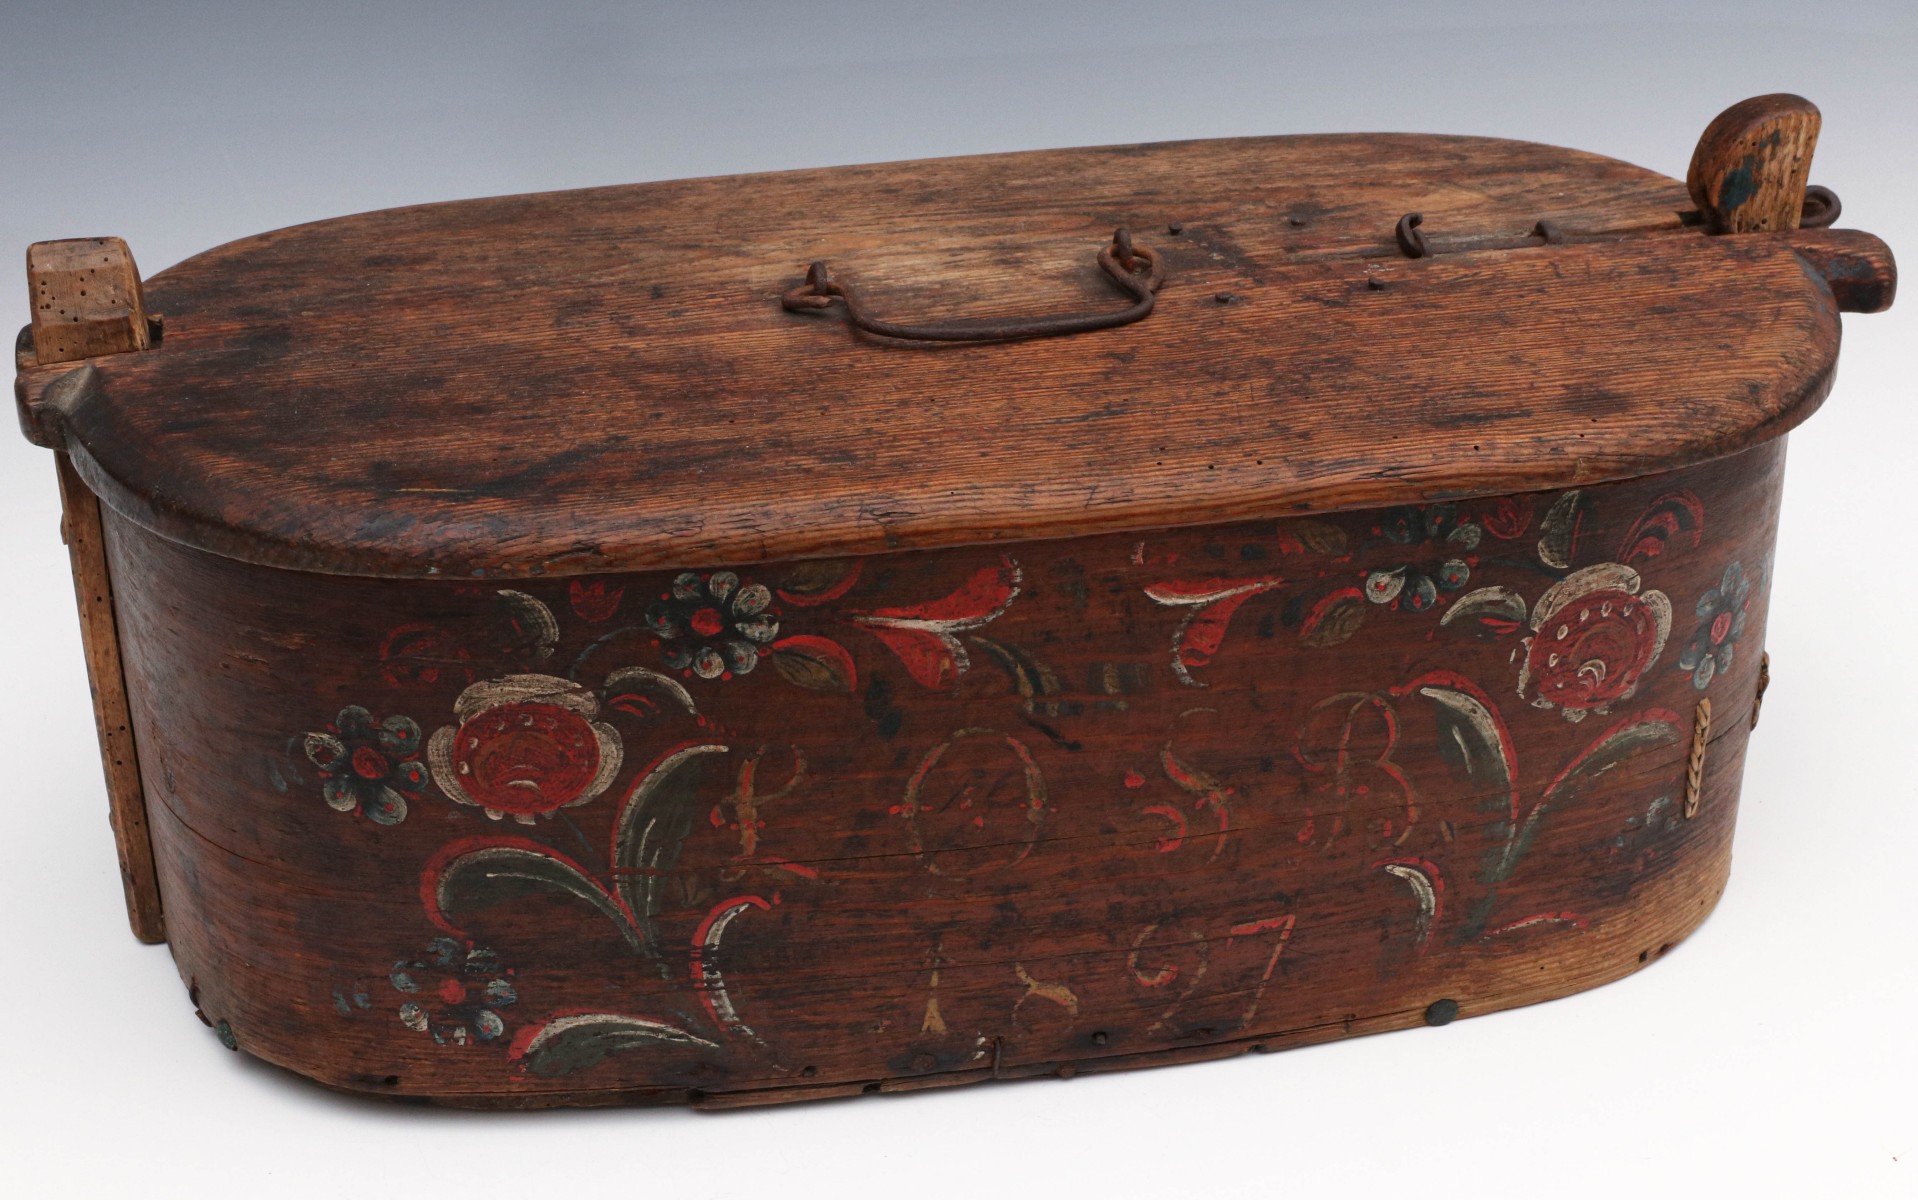 A SCANDINAVIAN BRIDE'S BOX WITH PAINTED FLORALS, 1897